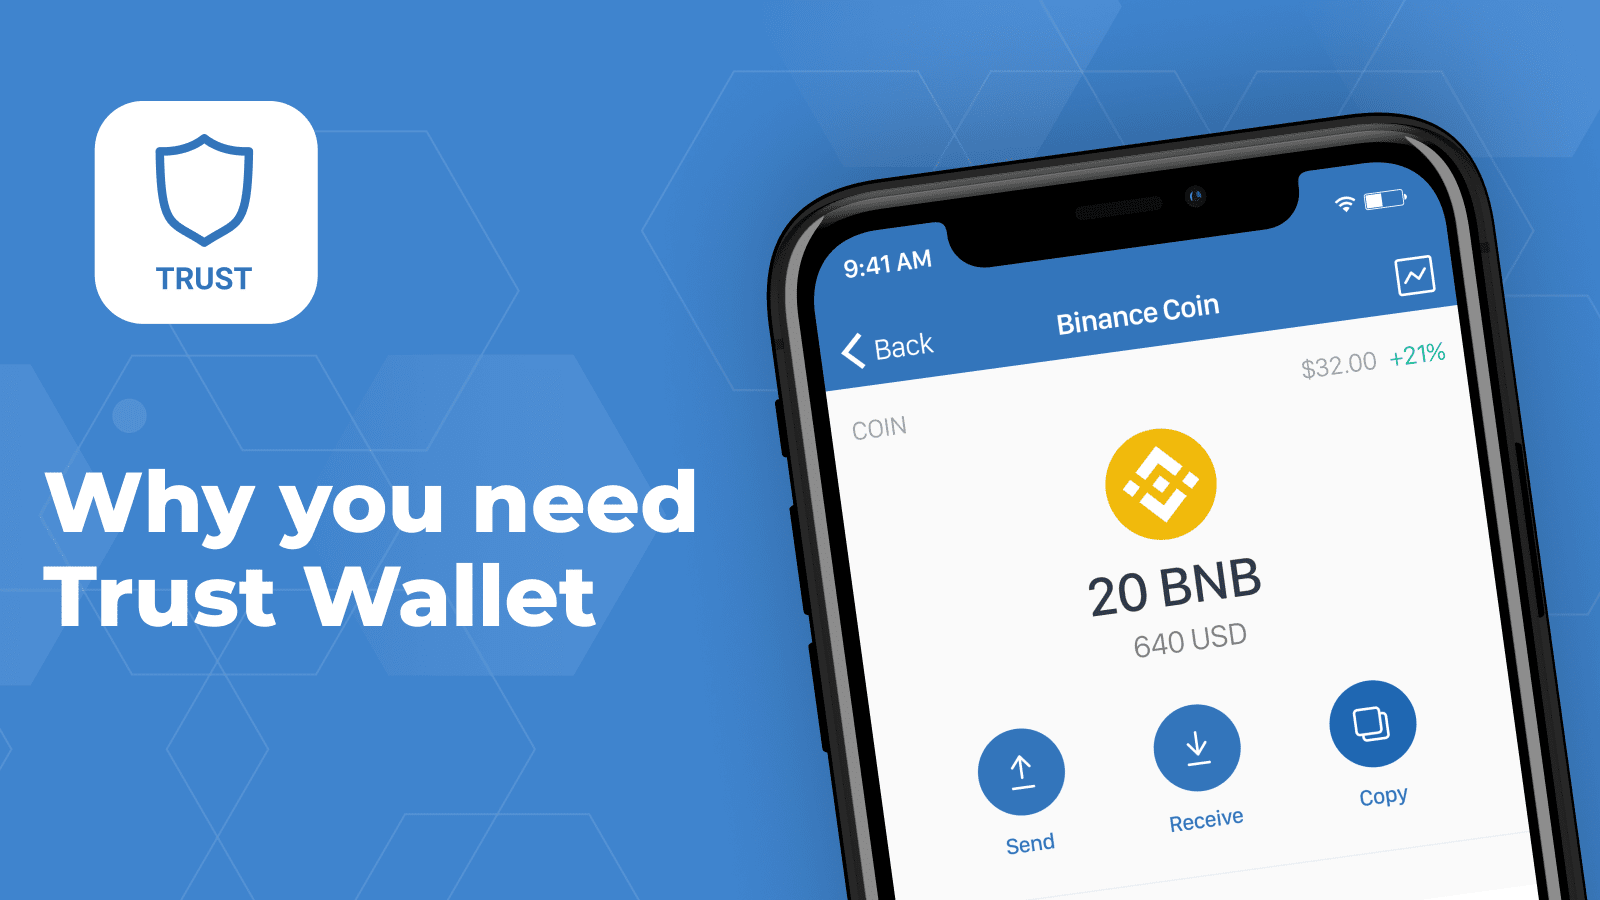 Open the Trust Wallet app and create a new wallet or import an existing one.